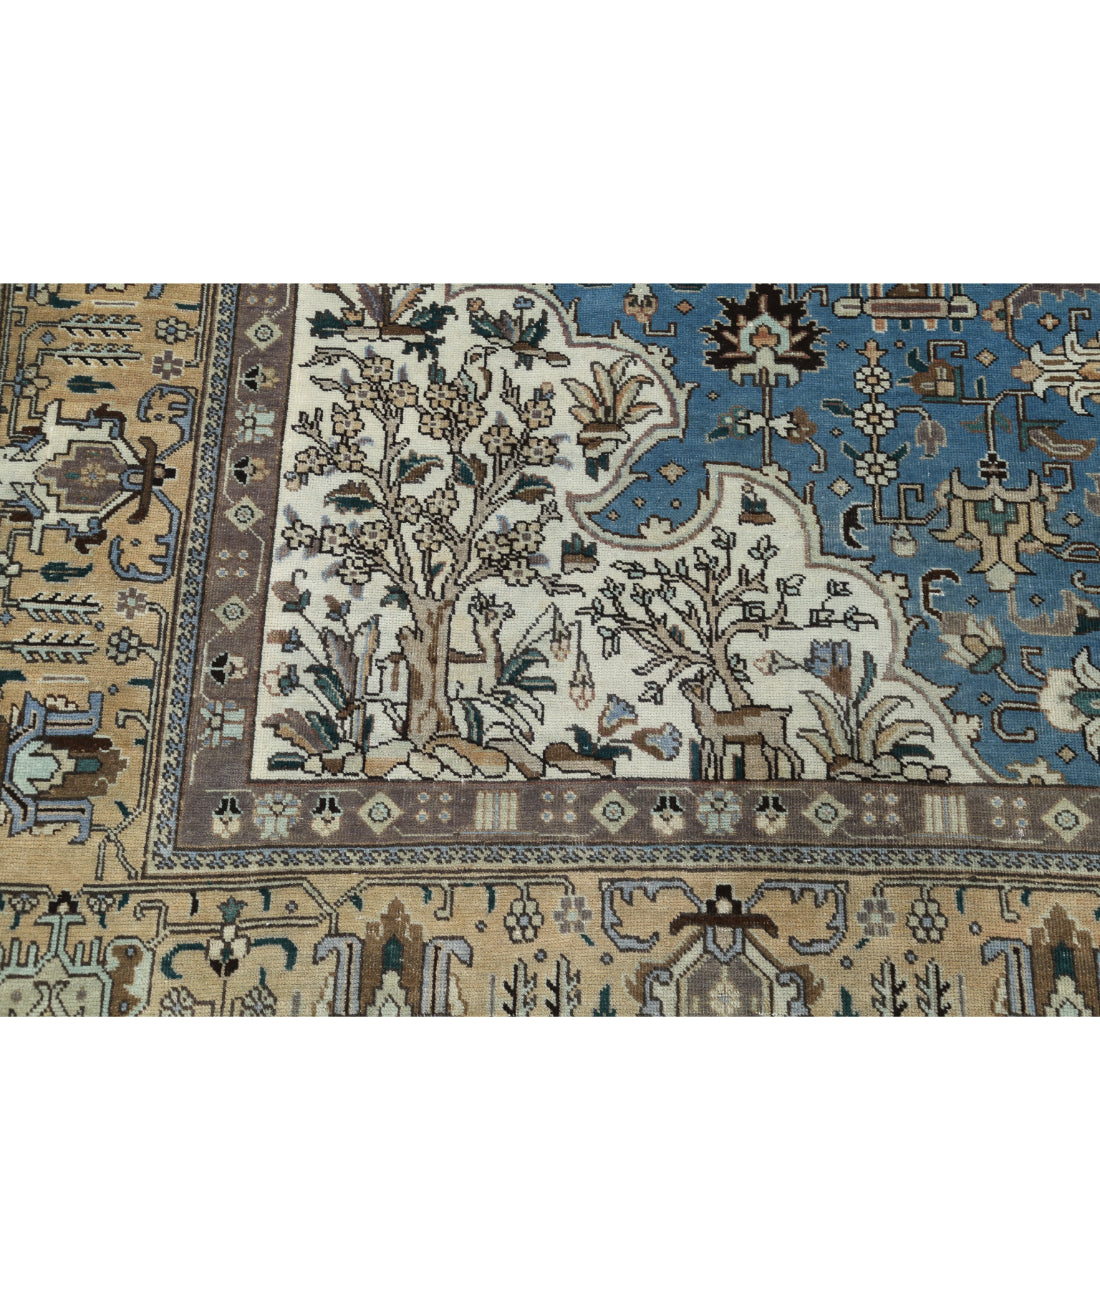 Hand Knotted Antique Persian Tabriz Wool Rug - 9'8'' x 12'1'' 9'8'' x 12'1'' (290 X 363) / Blue / Beige